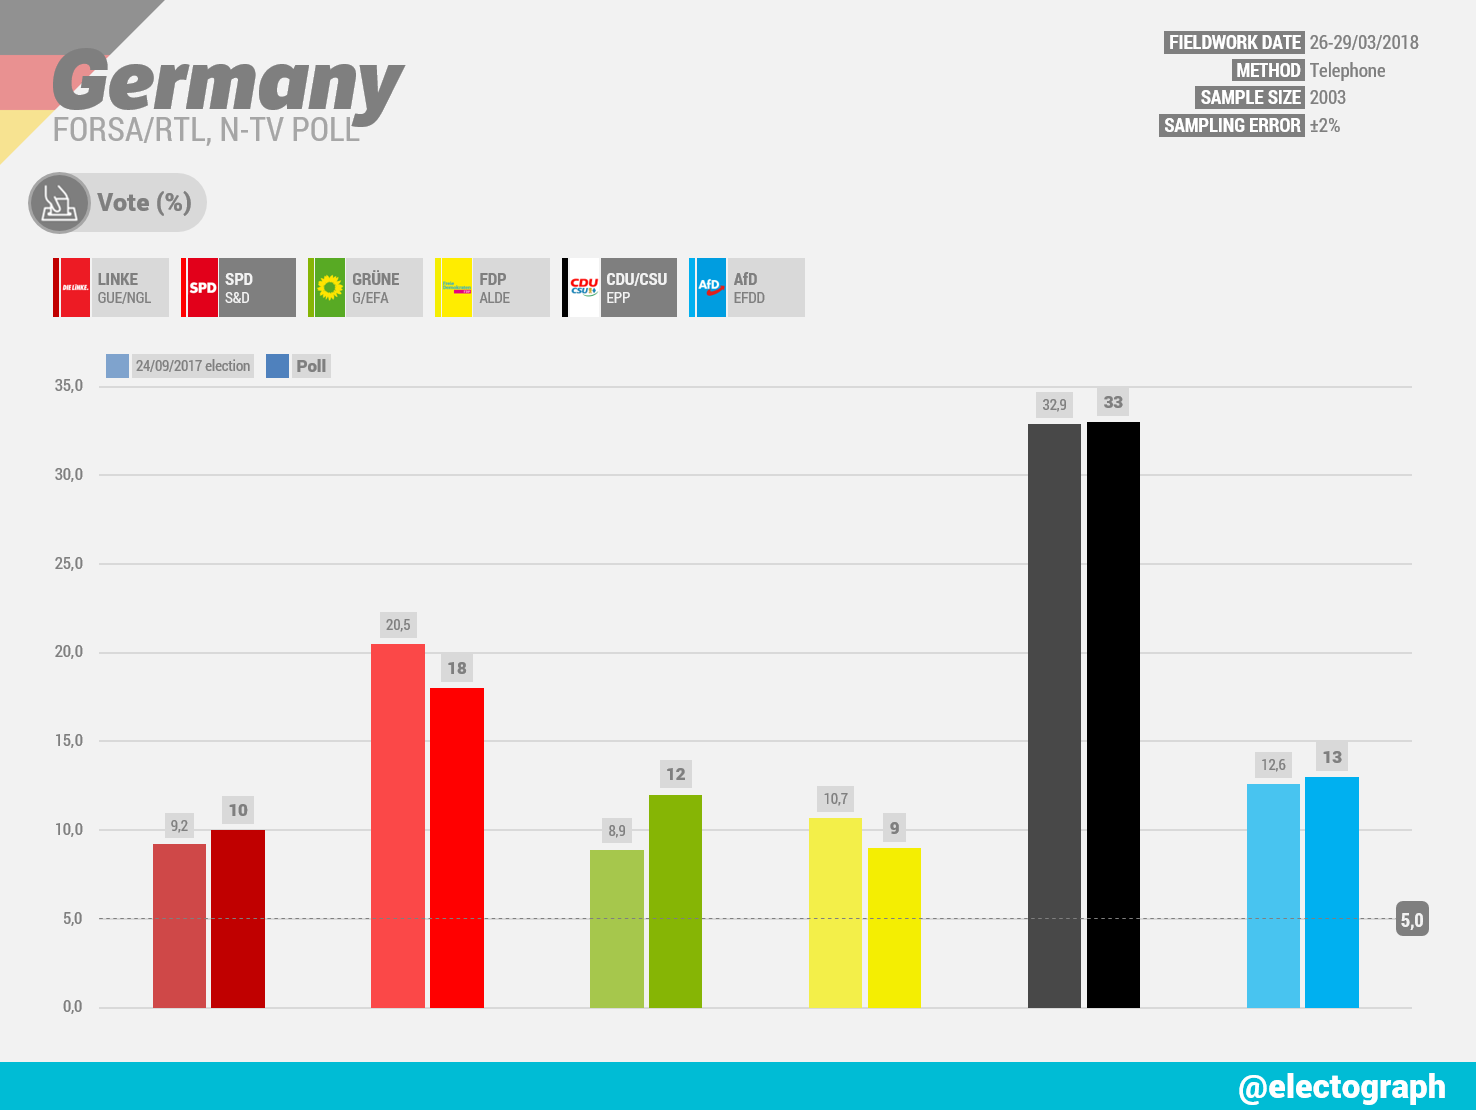 GERMANY Forsa poll chart for RTL and n-tv, March 2018